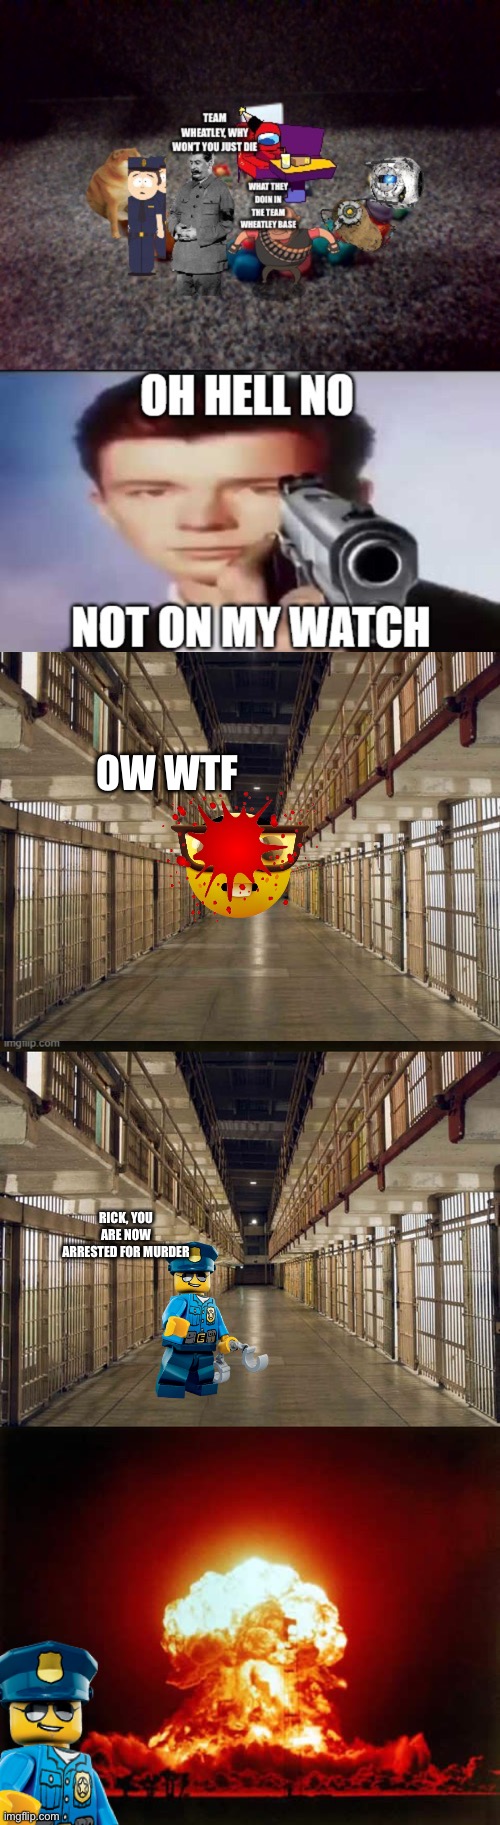 OW WTF; RICK, YOU ARE NOW ARRESTED FOR MURDER | image tagged in prison,memes,nuclear explosion | made w/ Imgflip meme maker